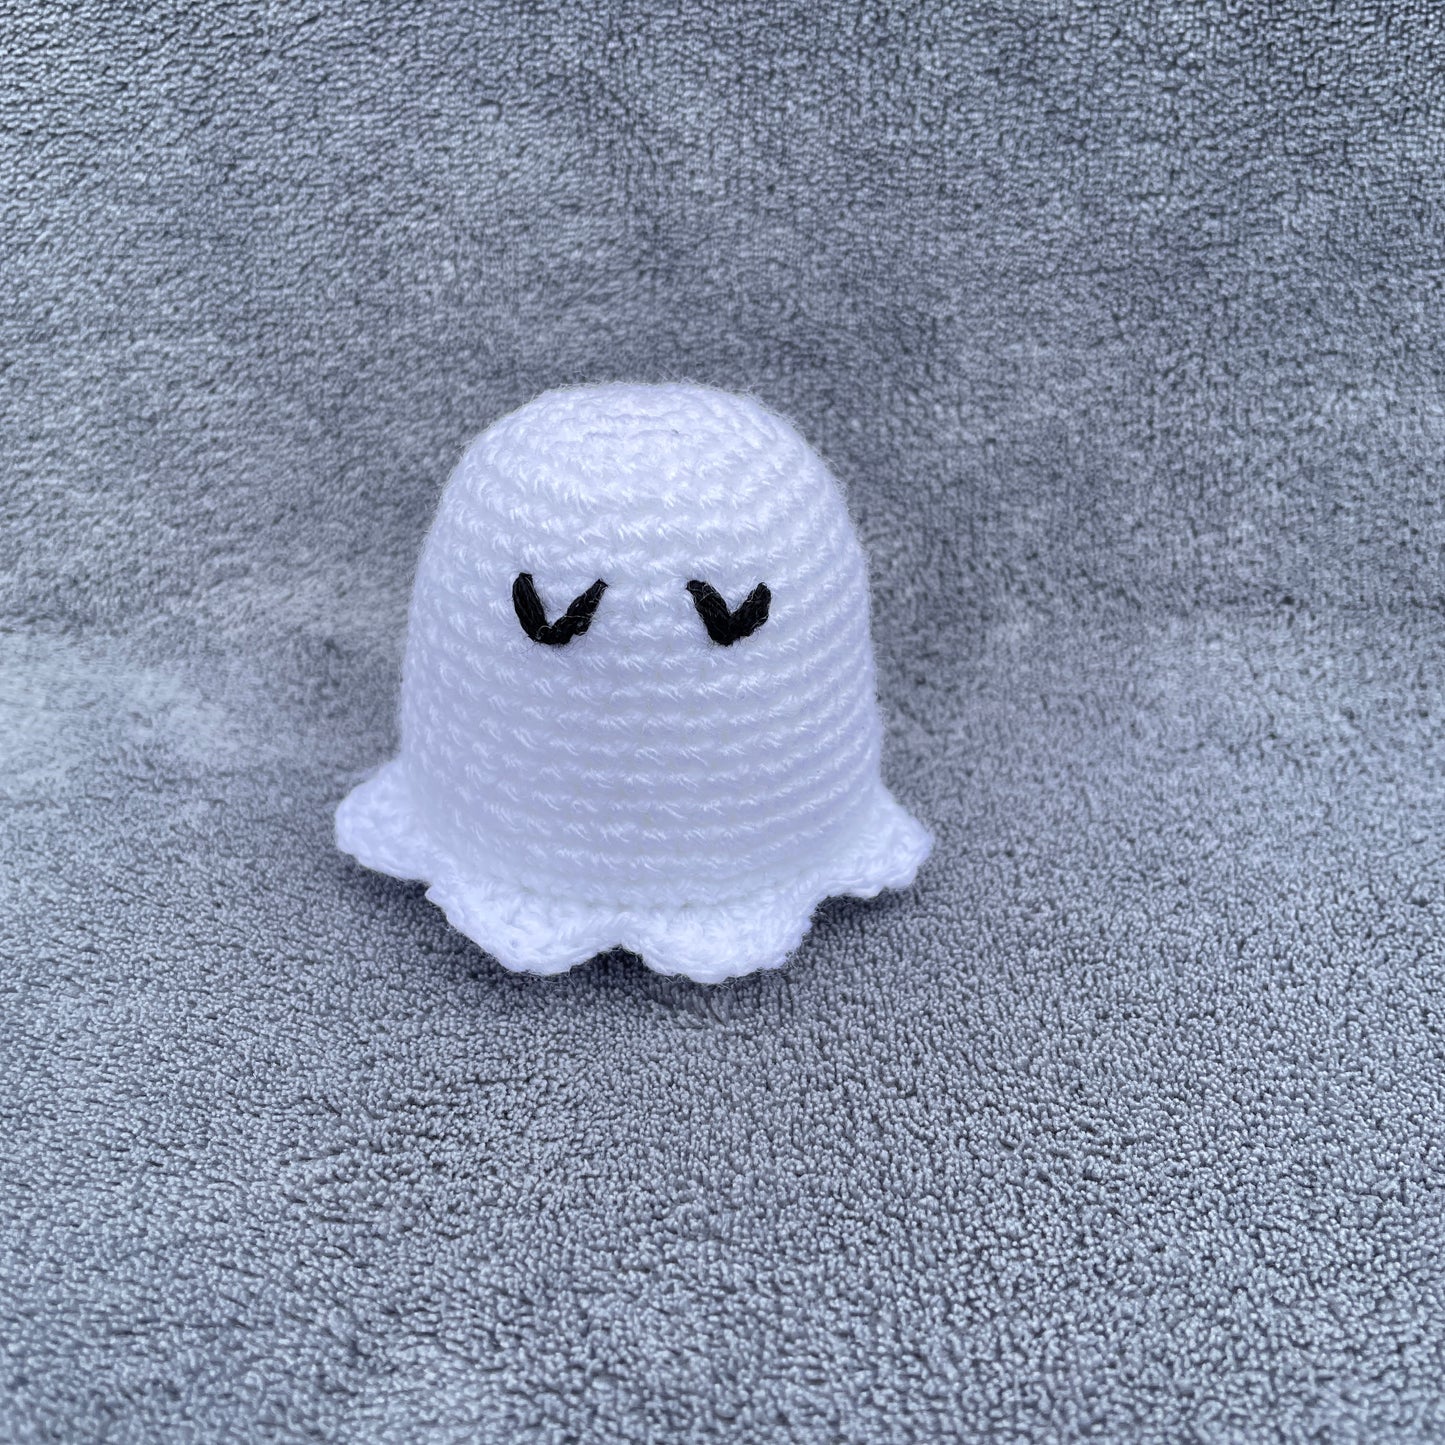 Gus the Ghost